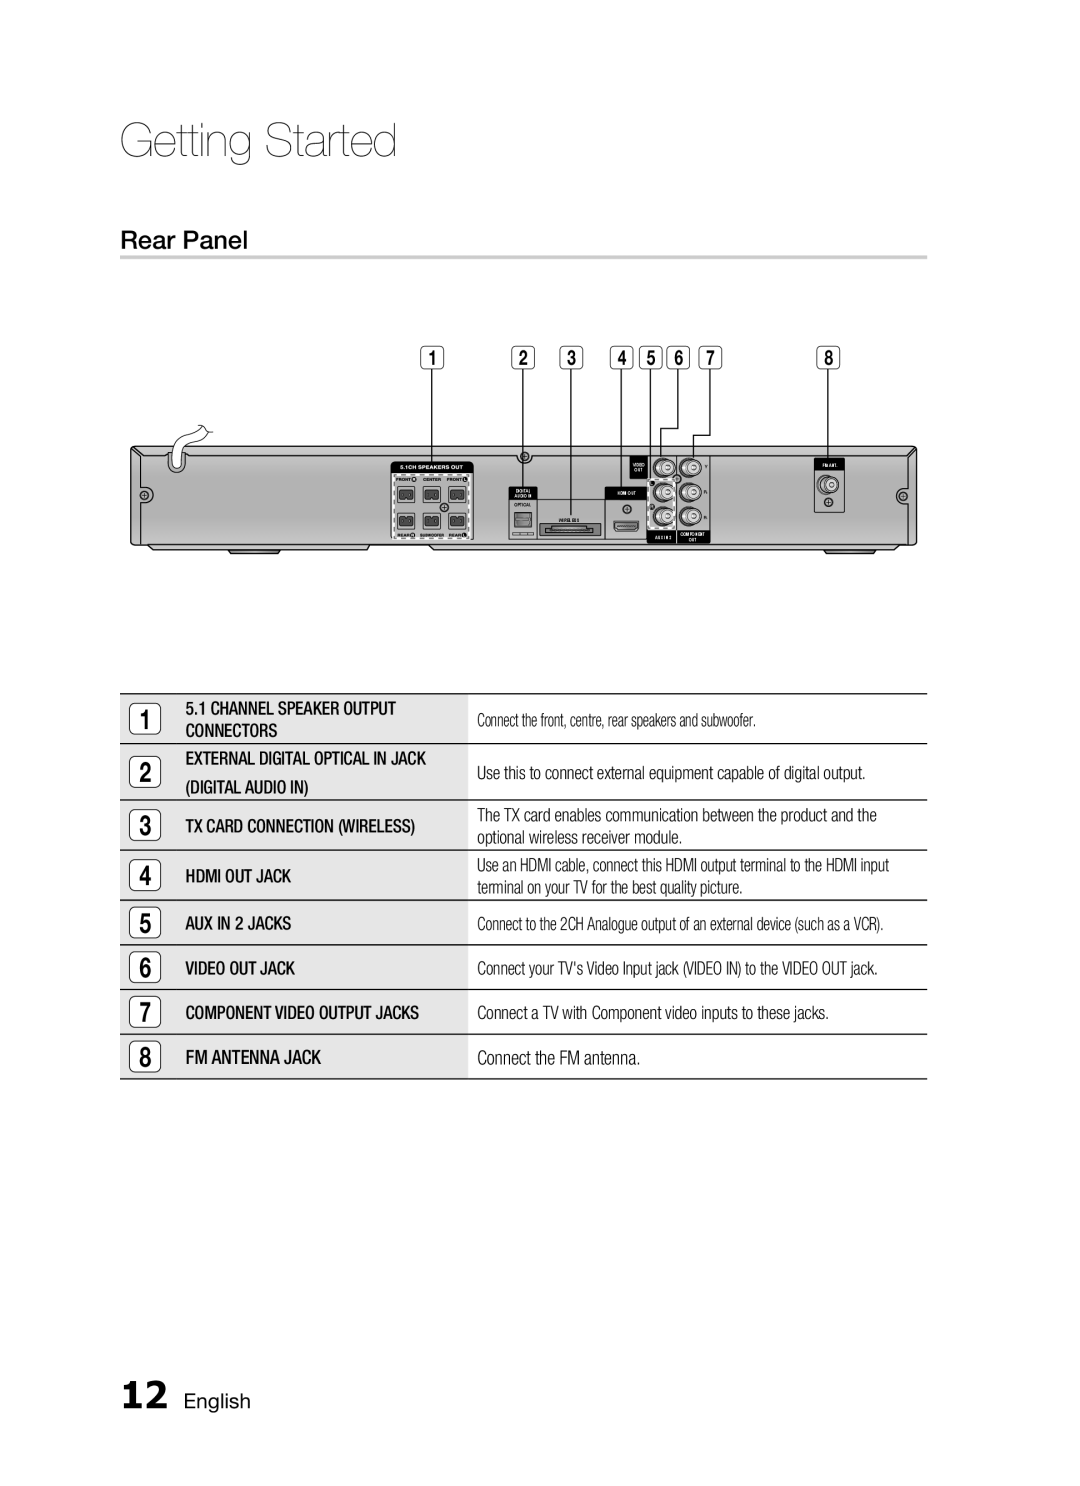 Samsung HT-C550, AH68-02269K, HT-C555, HT-C650W, HT-C553, HT-C653W, HT-C655W user manual Rear Panel, Getting Started, English 